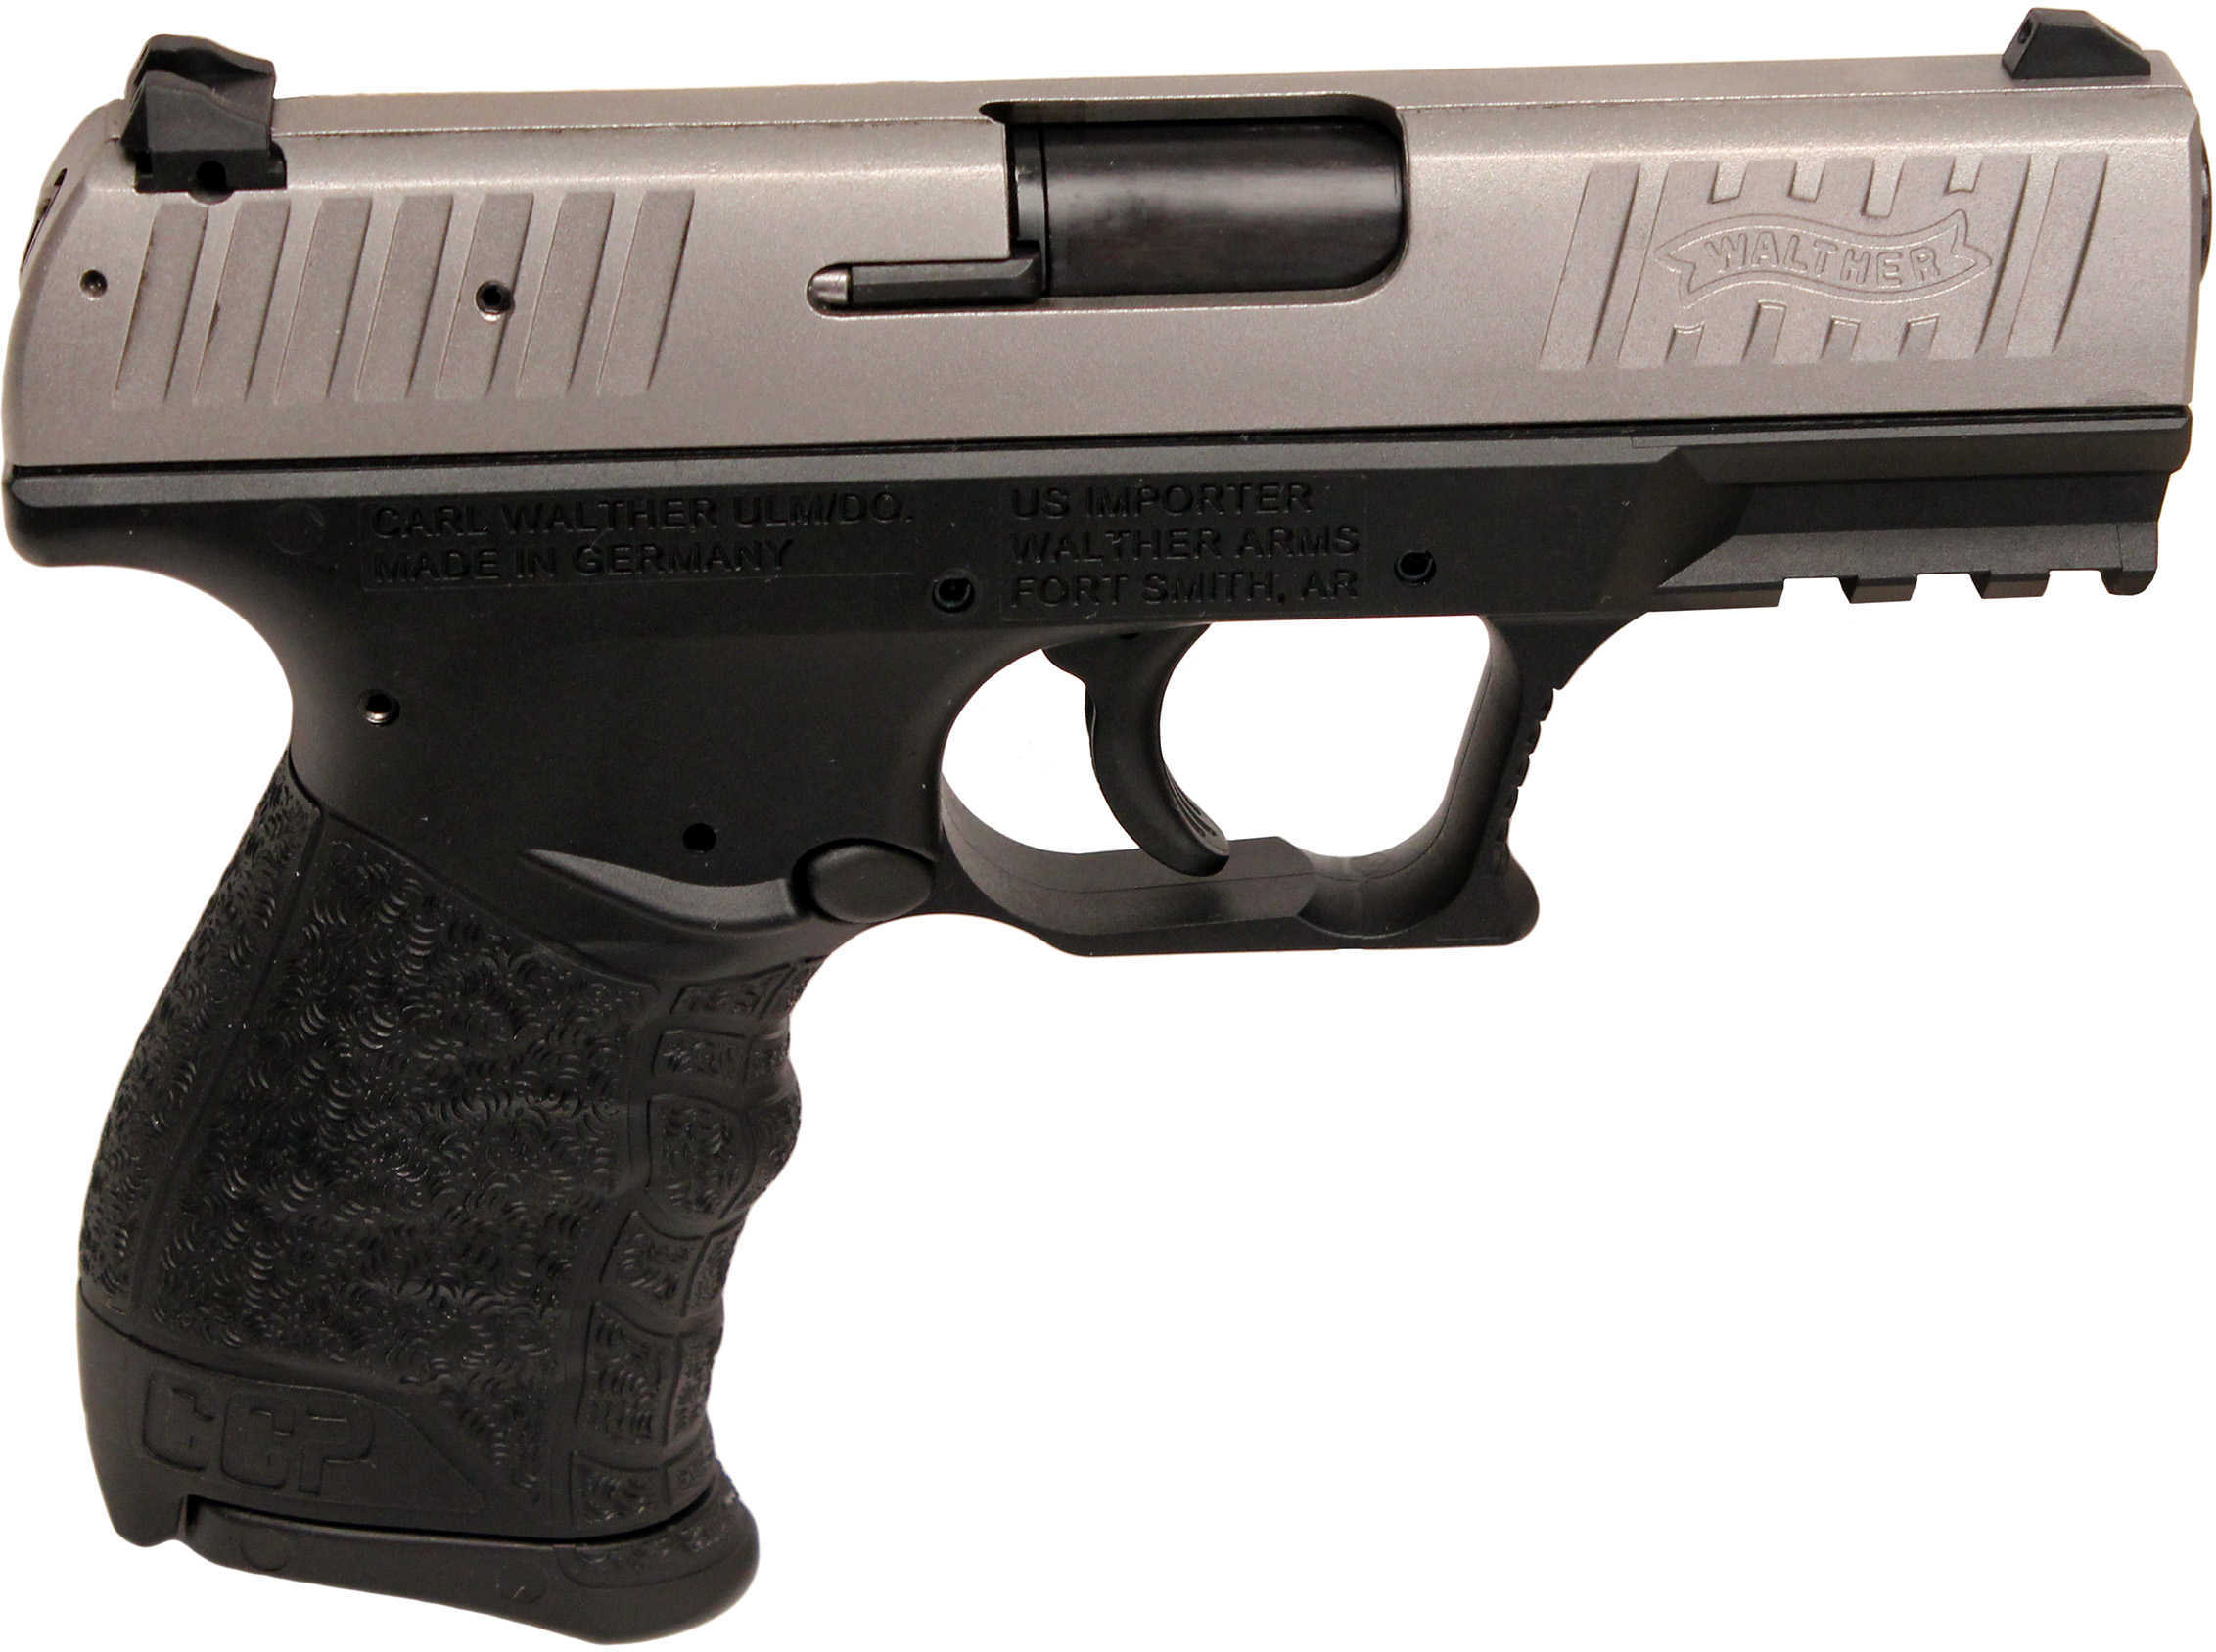 Walther CCP Concealed Carry Pistol 9mm Luger 3.54" Barrel 8 Rounds Stainless